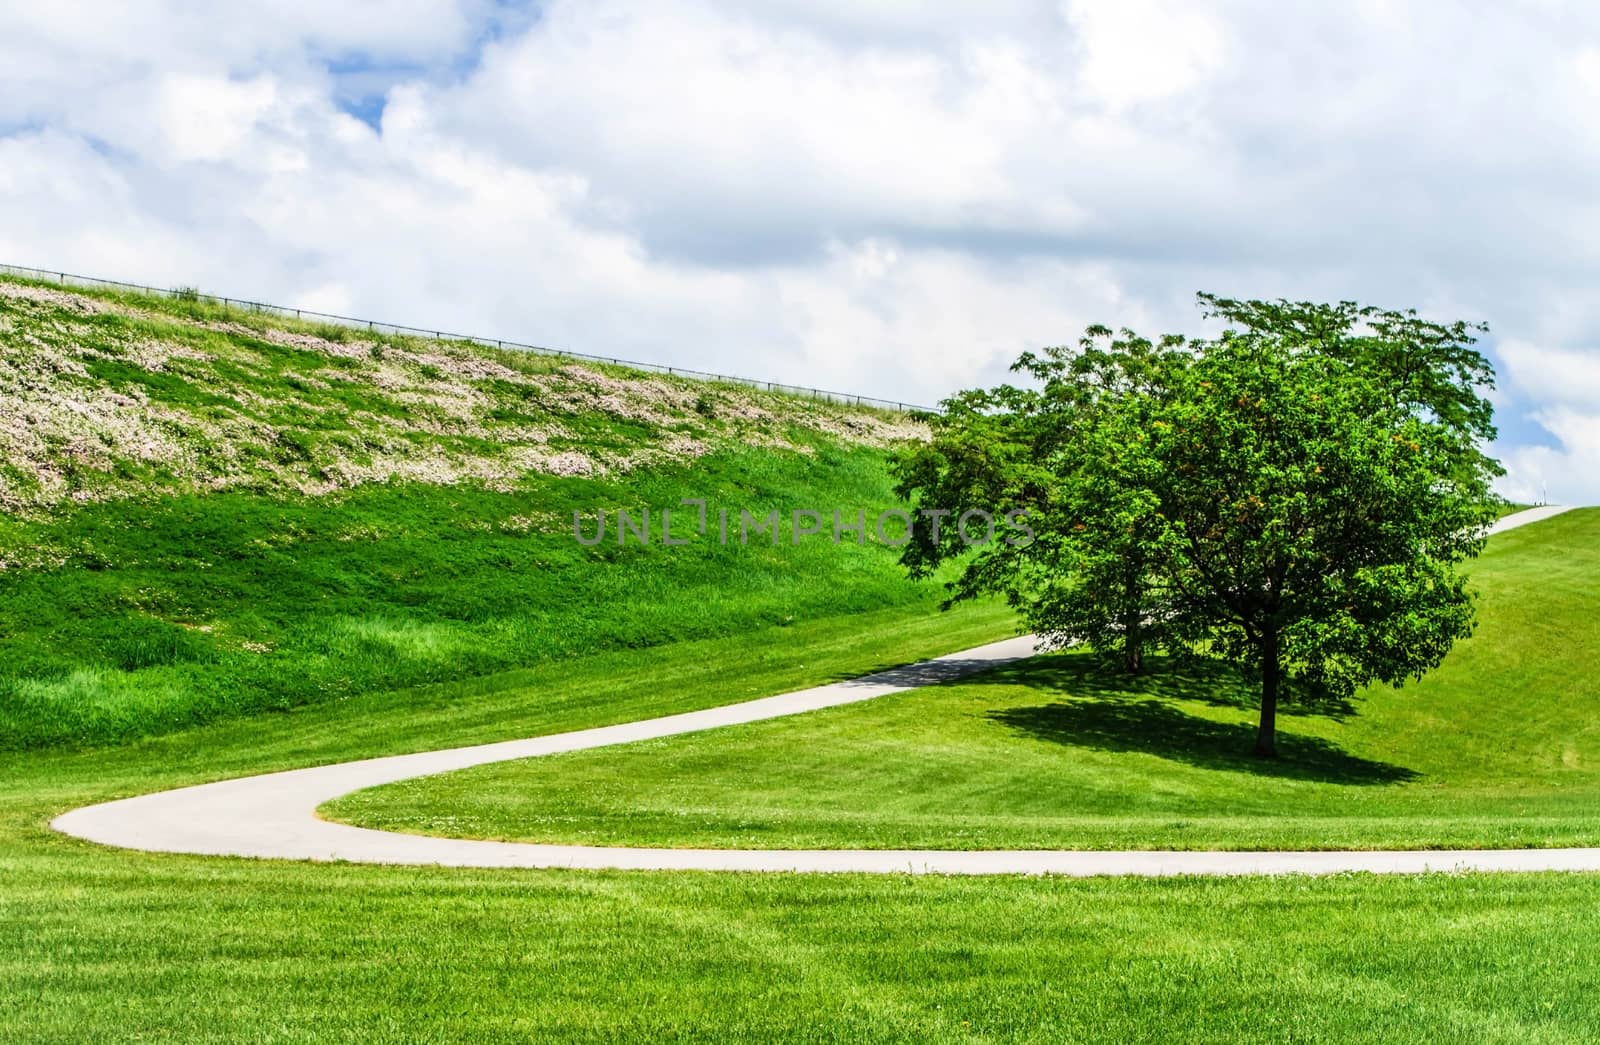 Paved curving path up a hill. Beautiful fluffy clouds are in the sky. 